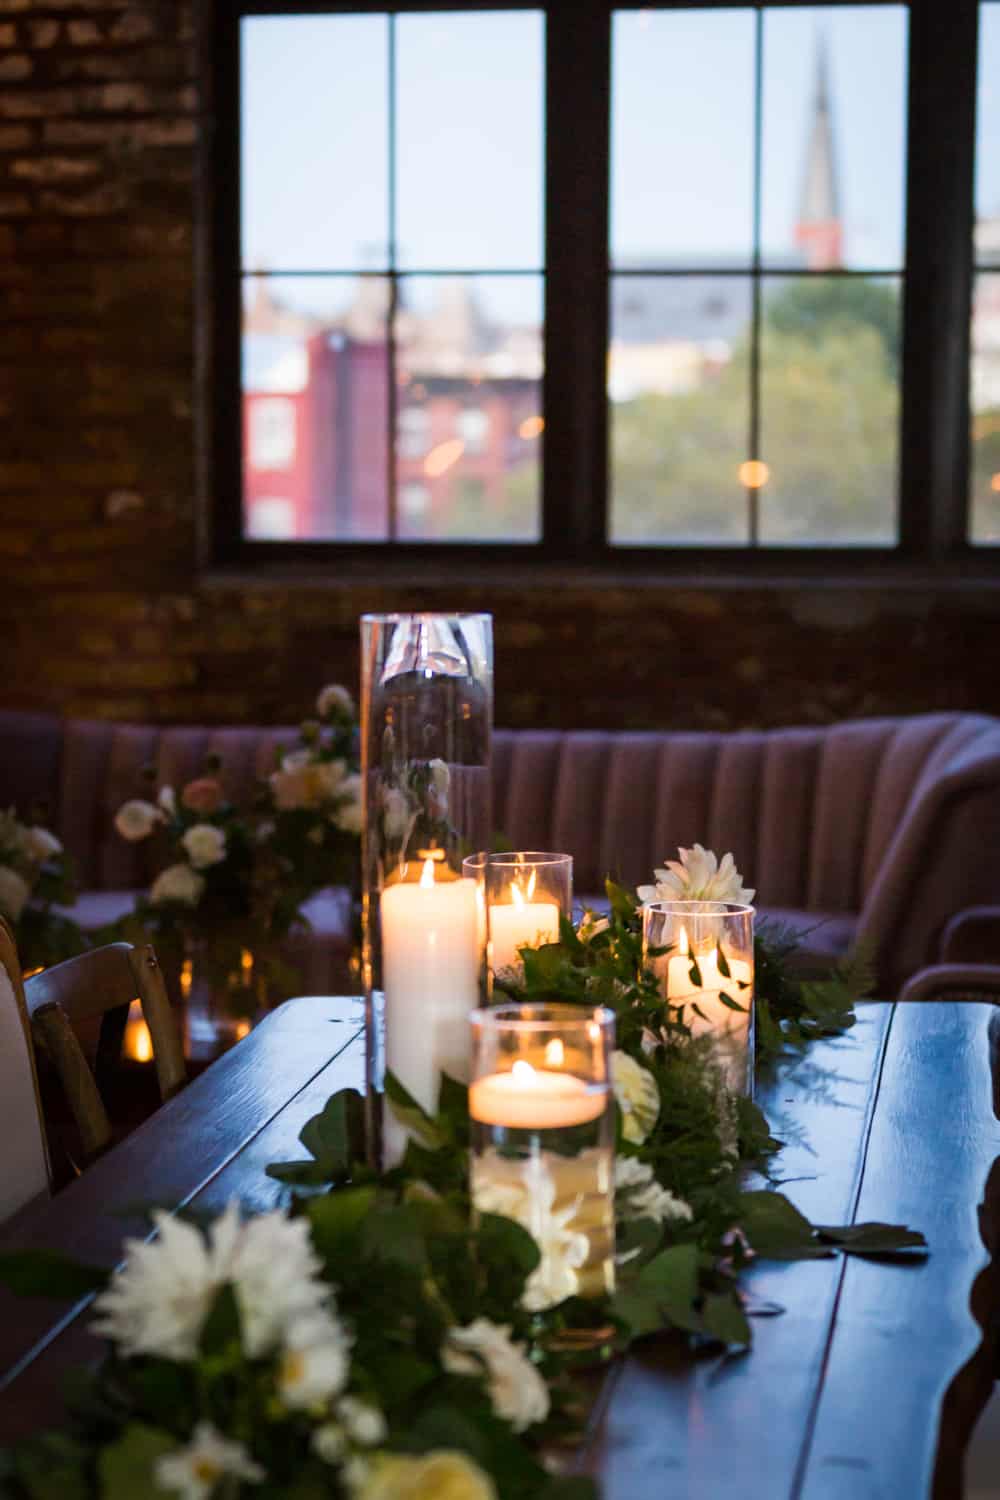 Table with lit candles and flowers